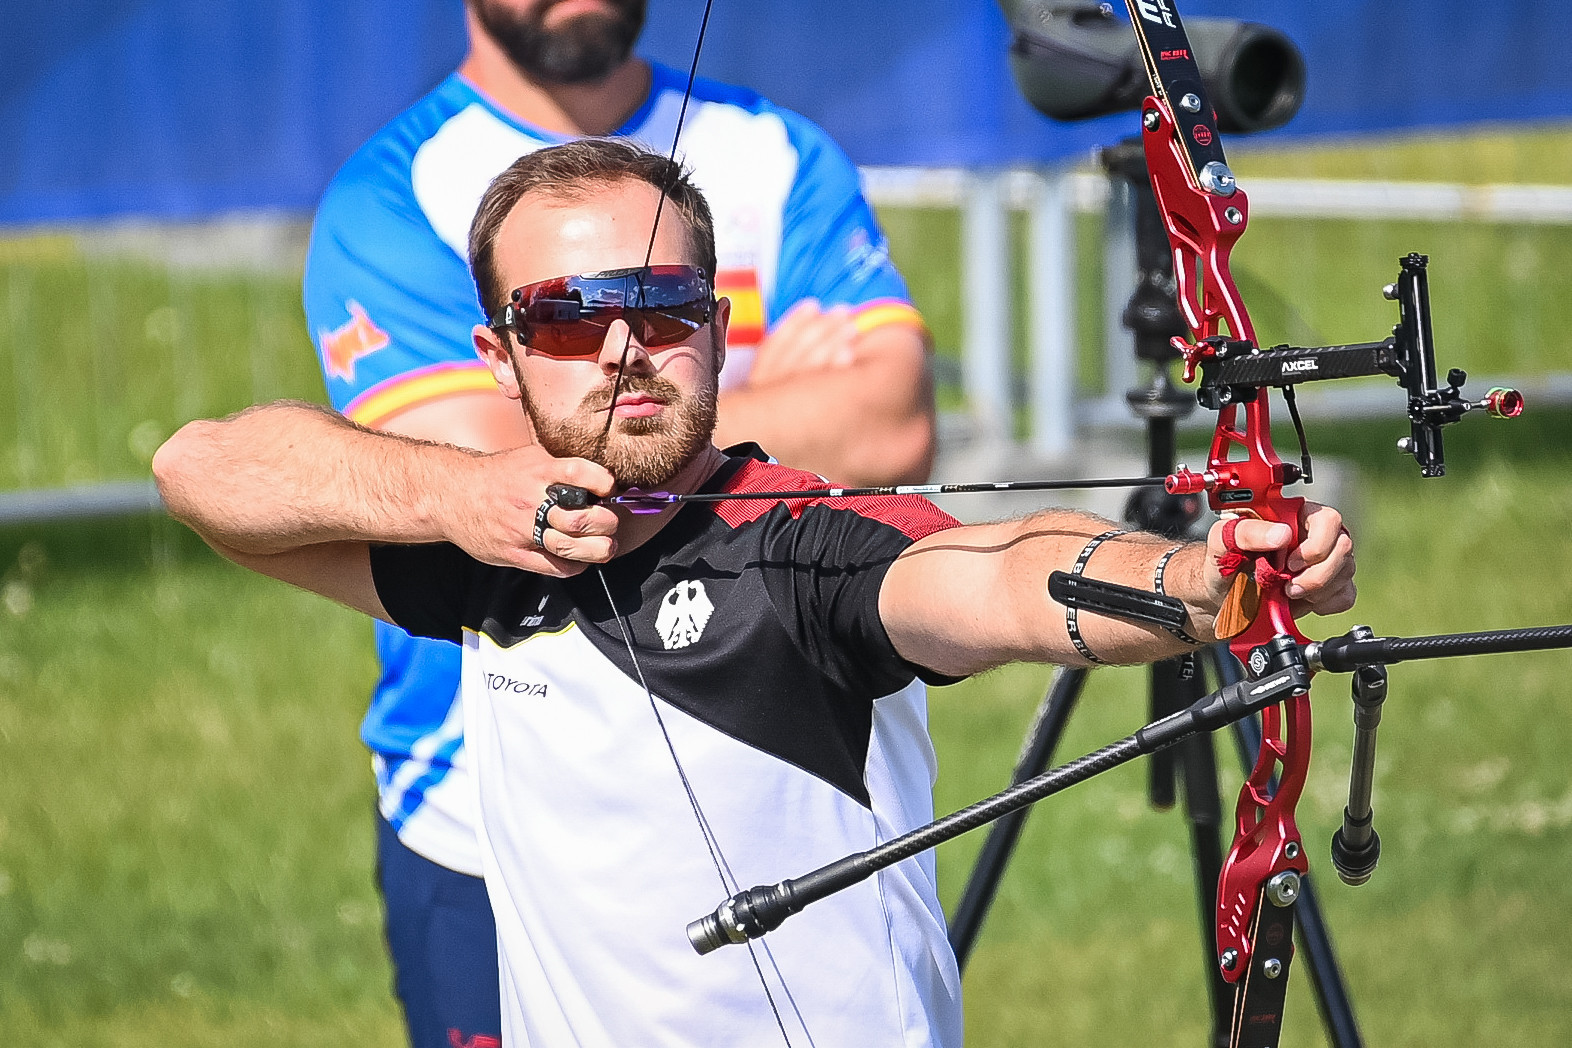 Germany's Florian Unruh sealed a Paris 2024 Olympics quota place and European Games gold in the men's individual recurve archery event ©Kraków-Małopolska 2023